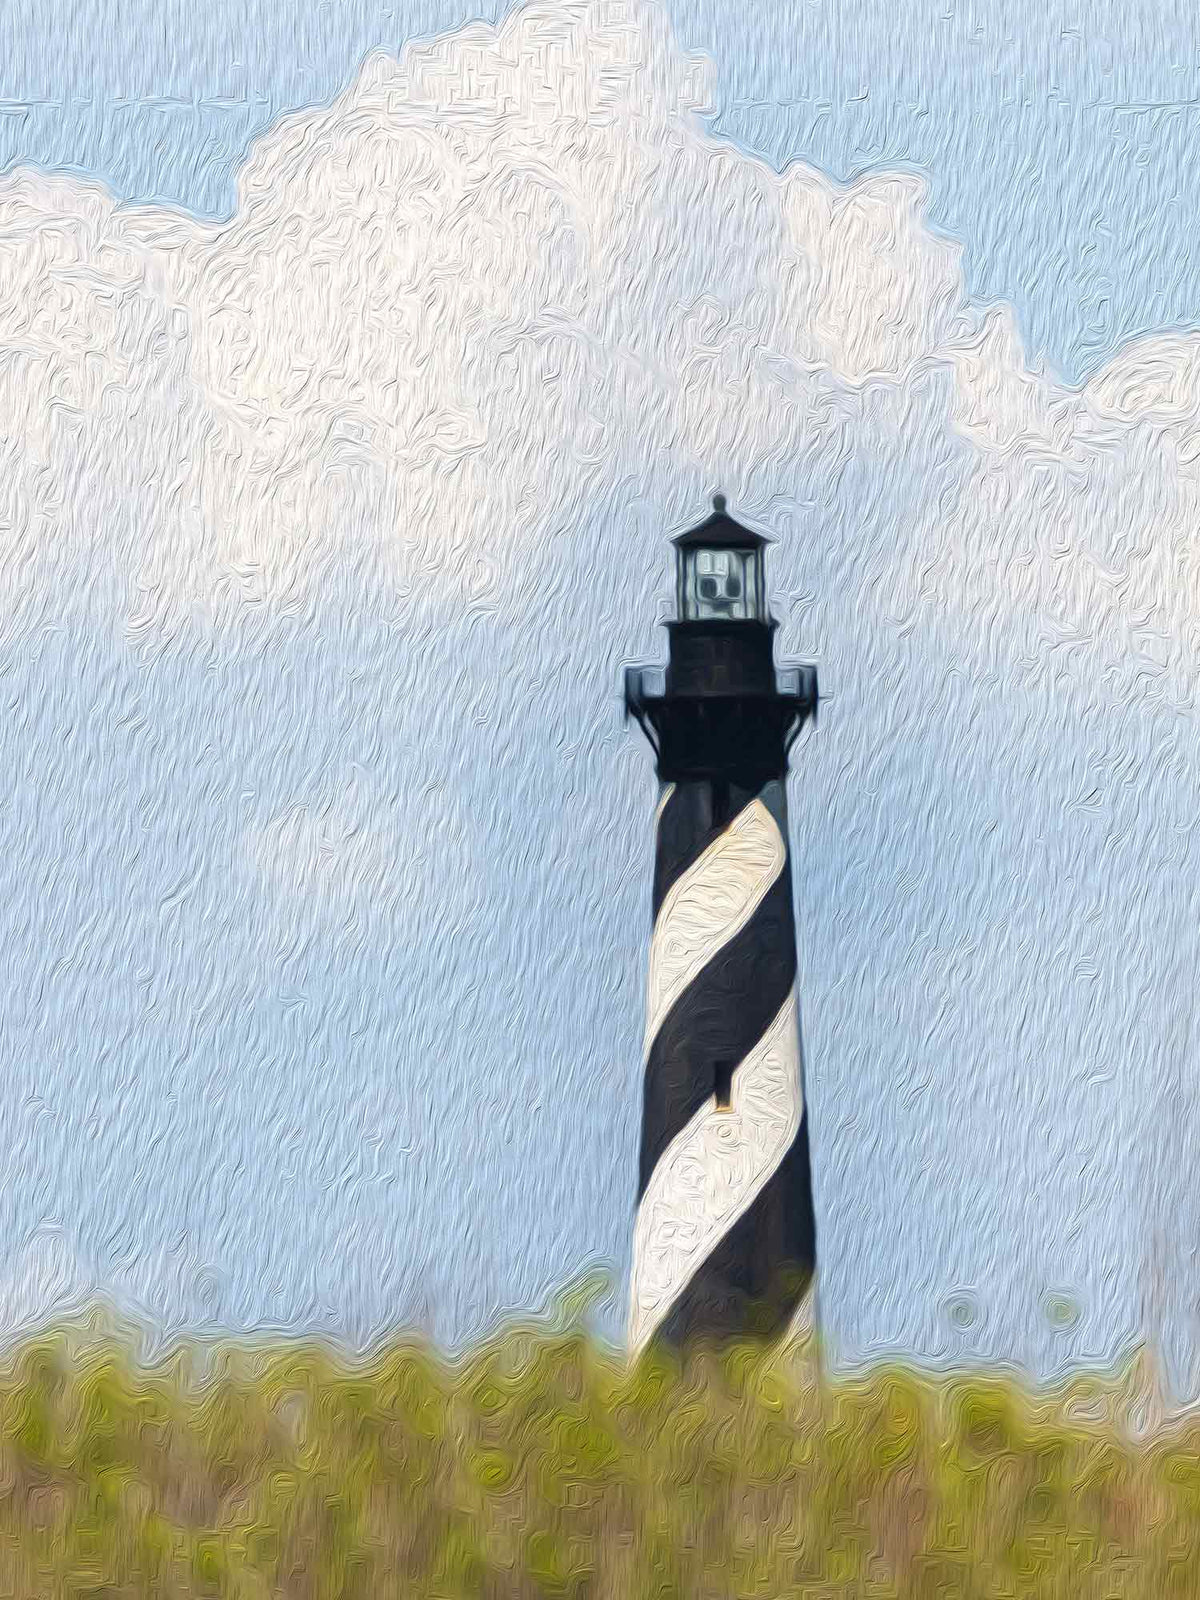 Cape Hatteras Lighthouse (Outer Banks)